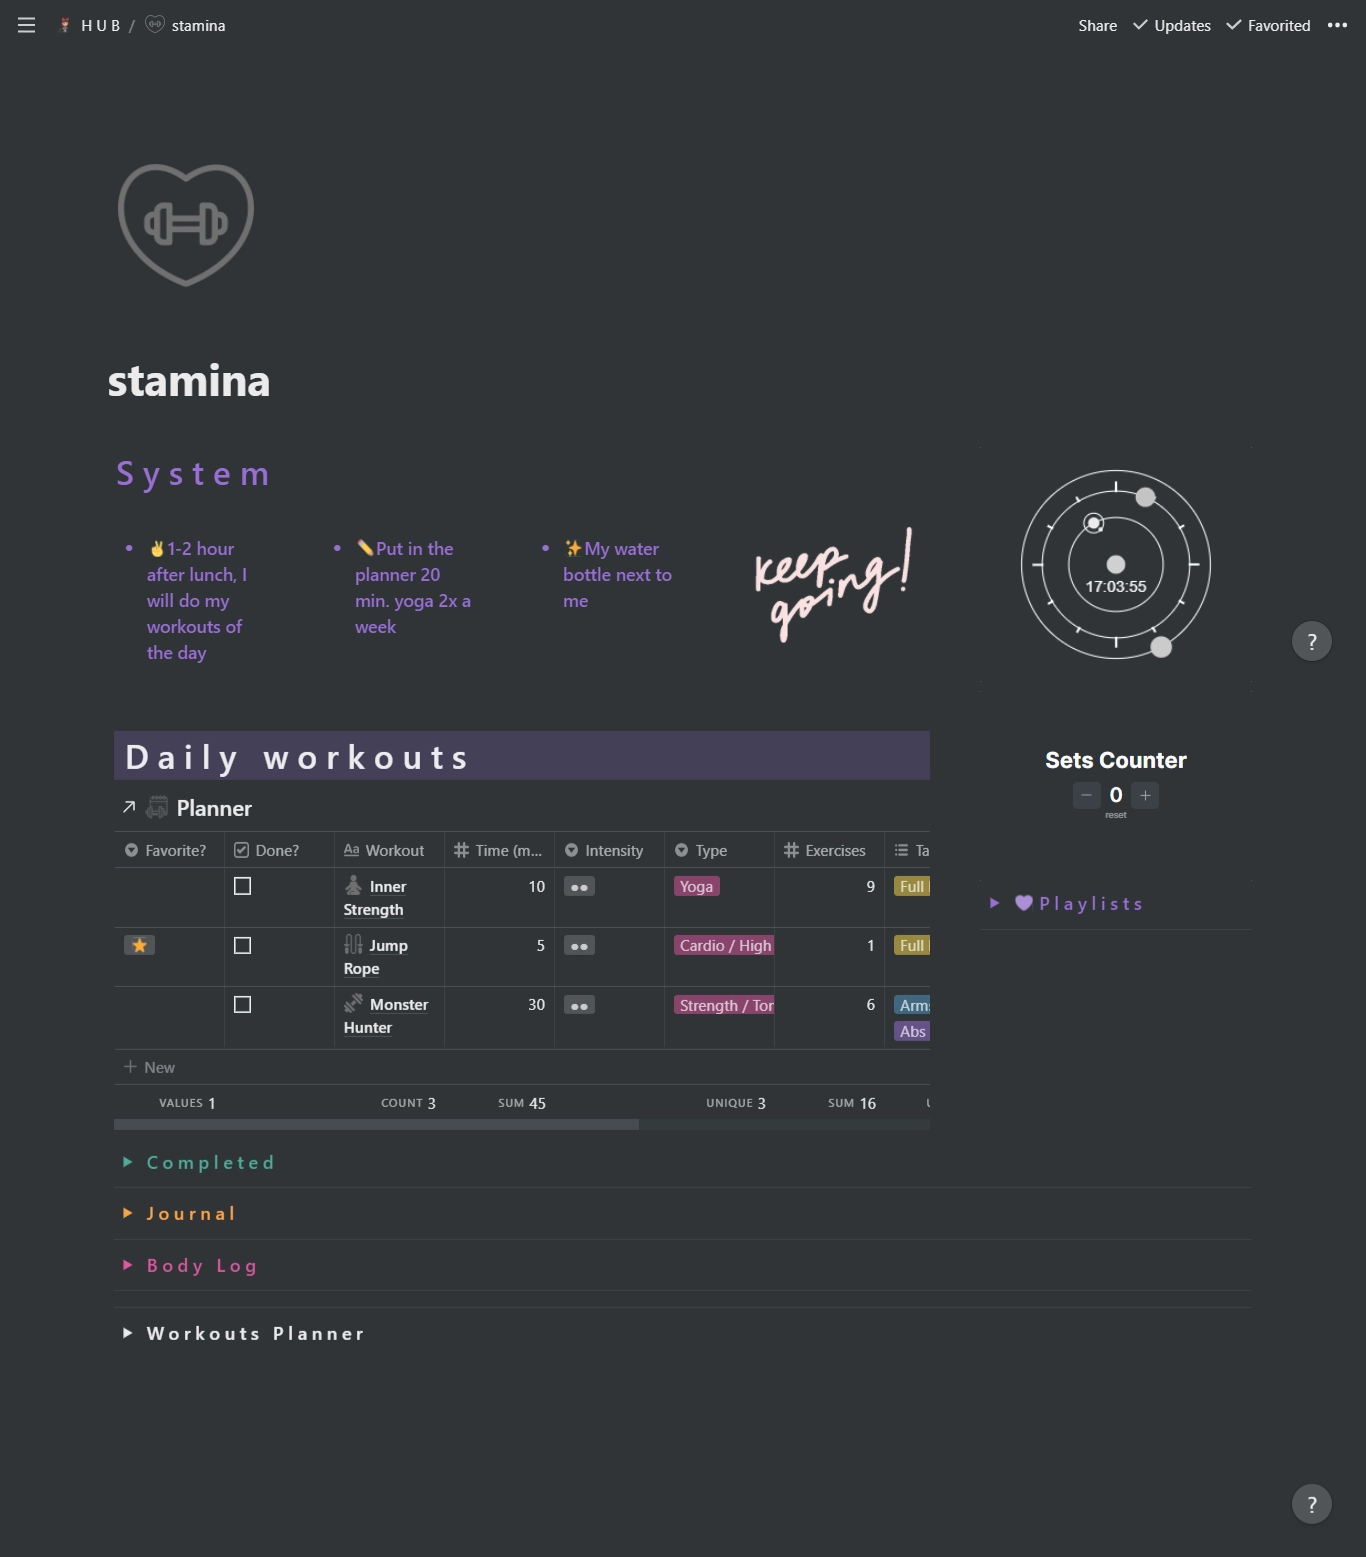 Stamina Workouts Planner Extras